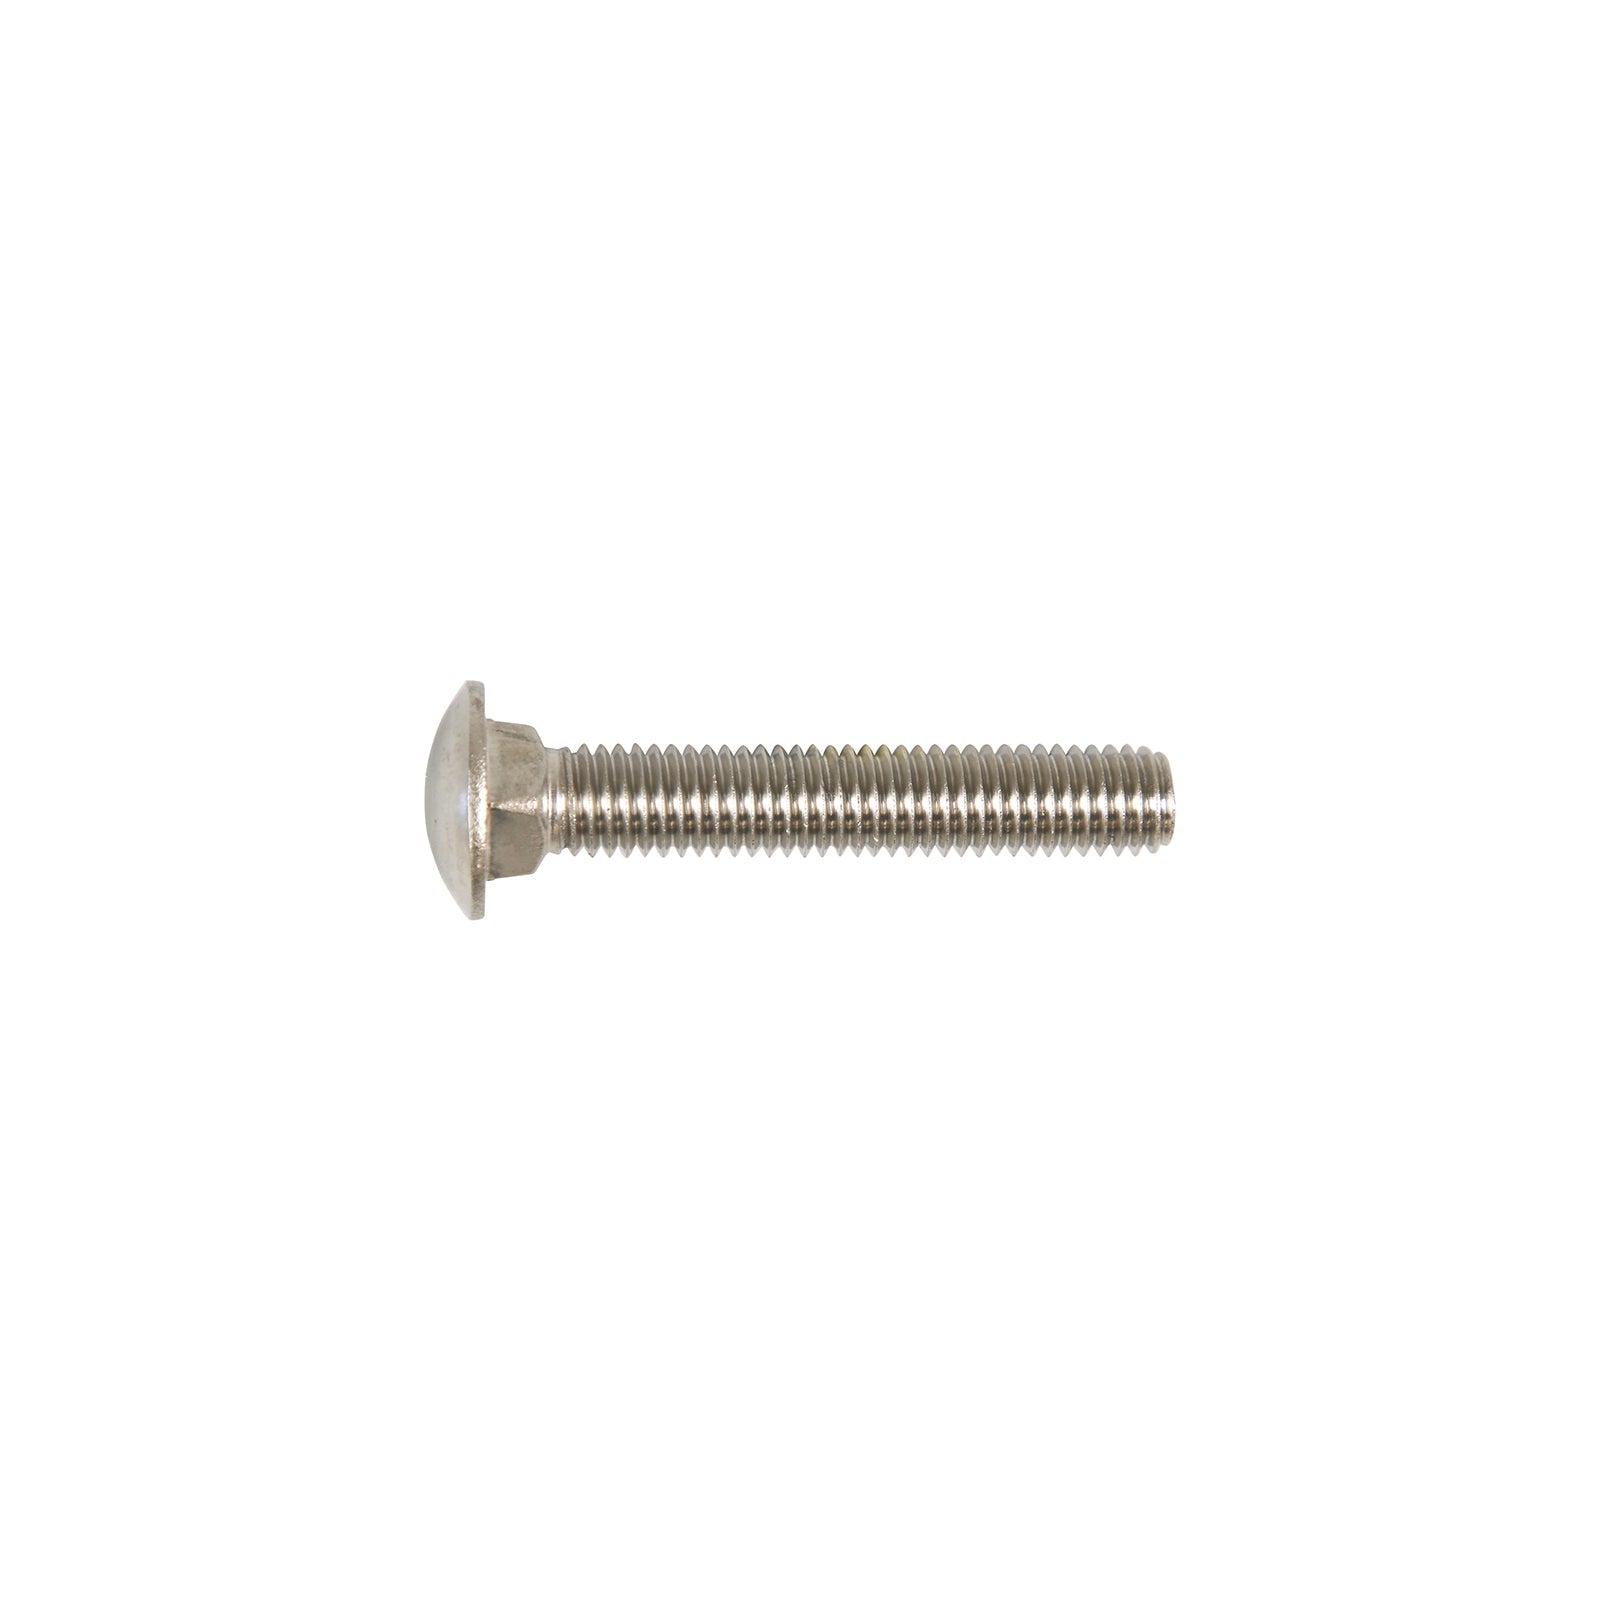 1/2"-13 x 3" Conquest Carriage Bolt - 304 Stainless Steel